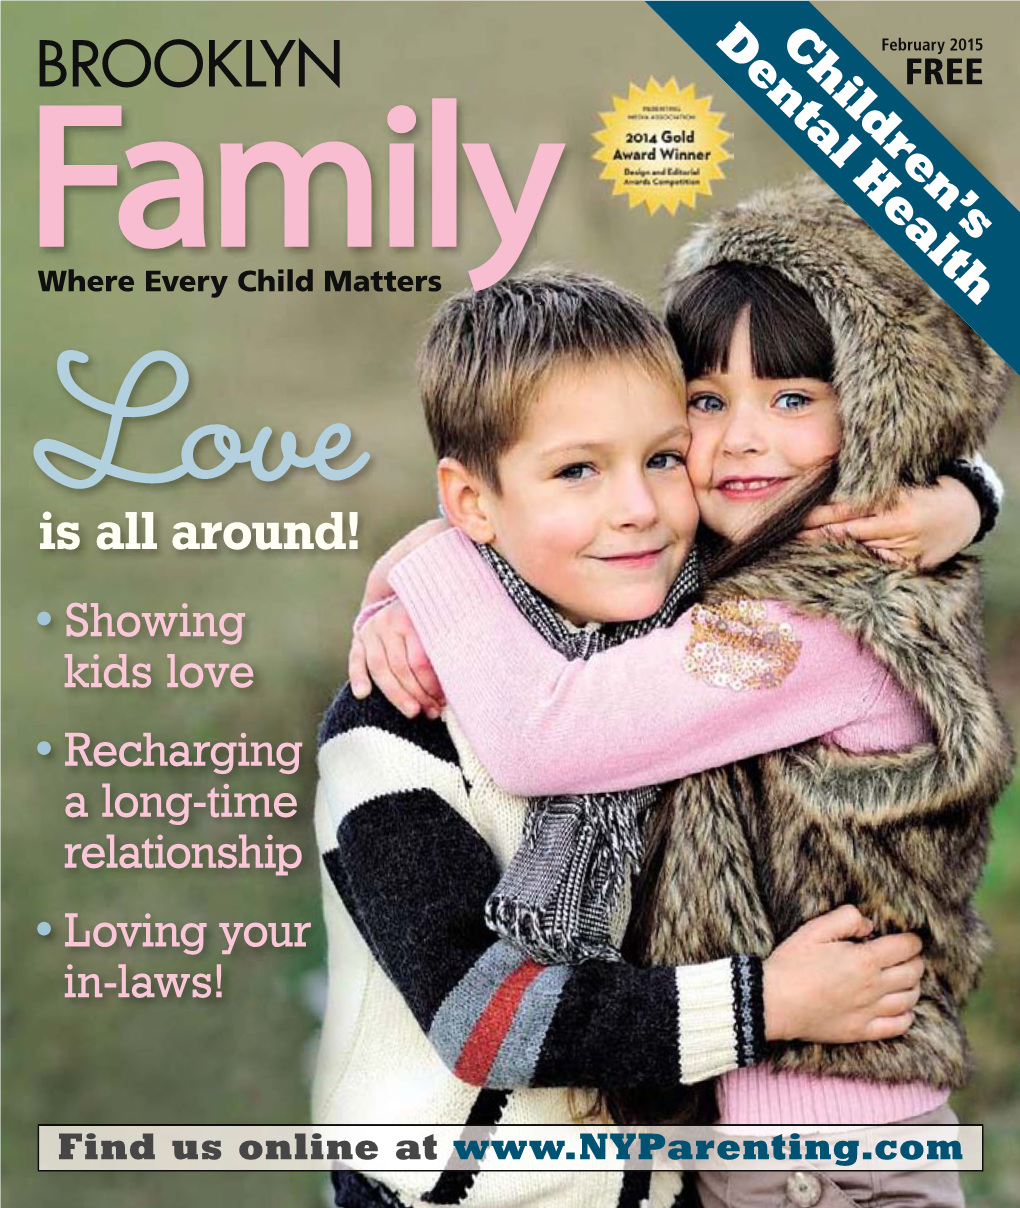 Brooklyn Family February 2015 Features Columns 6 Tails of Love 16 Fabulyss Finds Love Can Be Expressed in Many Ways by Lyss Stern by Patrick Hempfing 18 Dear Dr